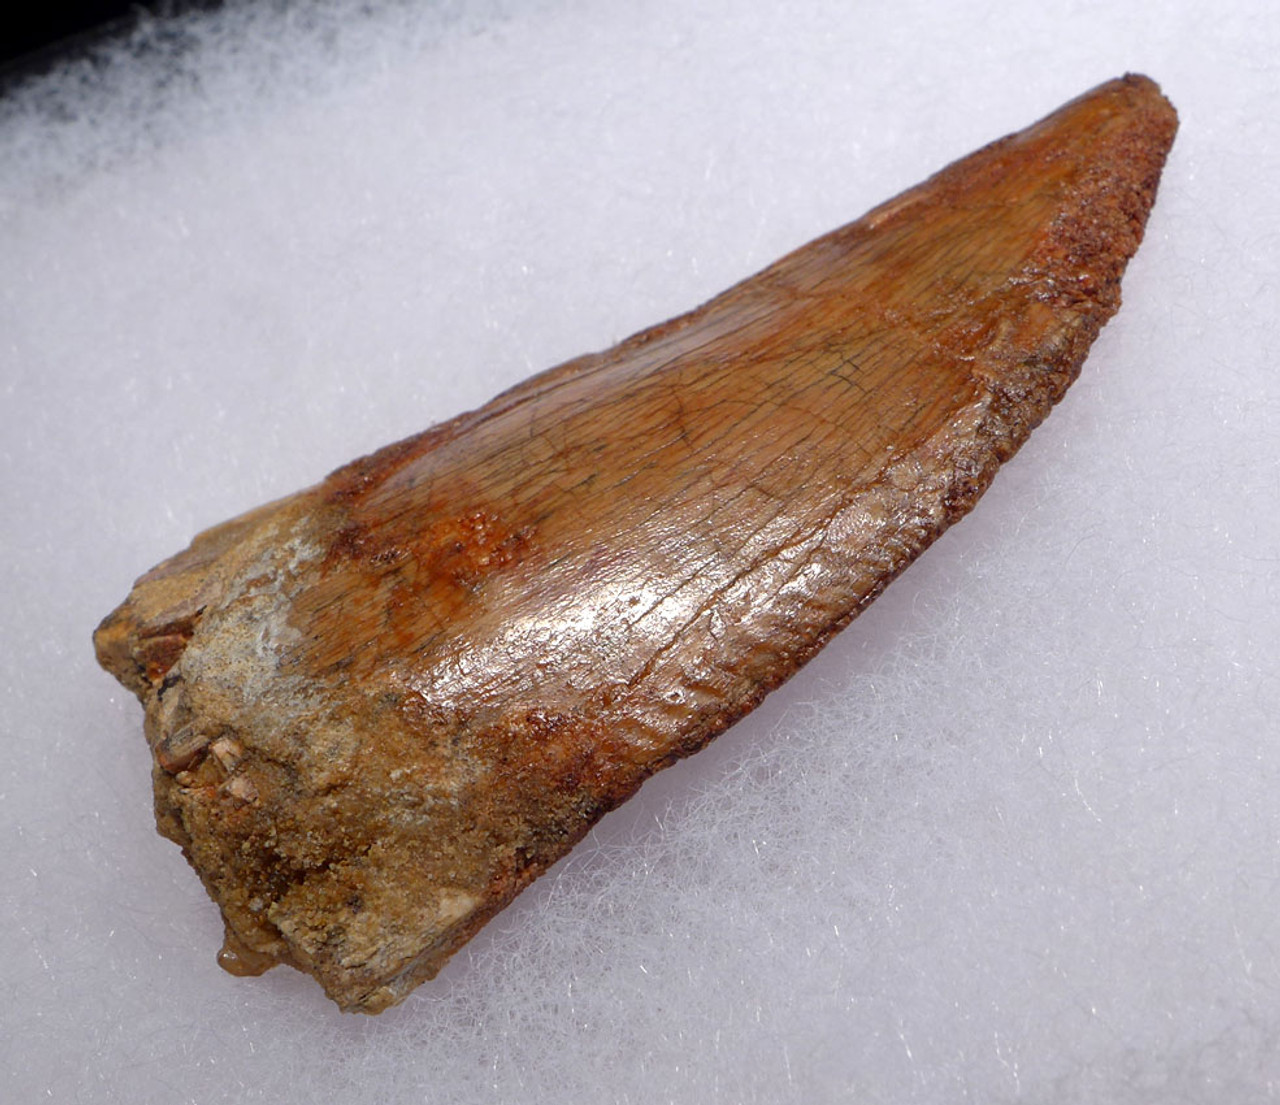 DT2-092 - LARGE 3 INCH FOSSIL CARCHARODONTOSAURUS TOOTH FROM THE LARGEST MEAT-EATING DINOSAUR 